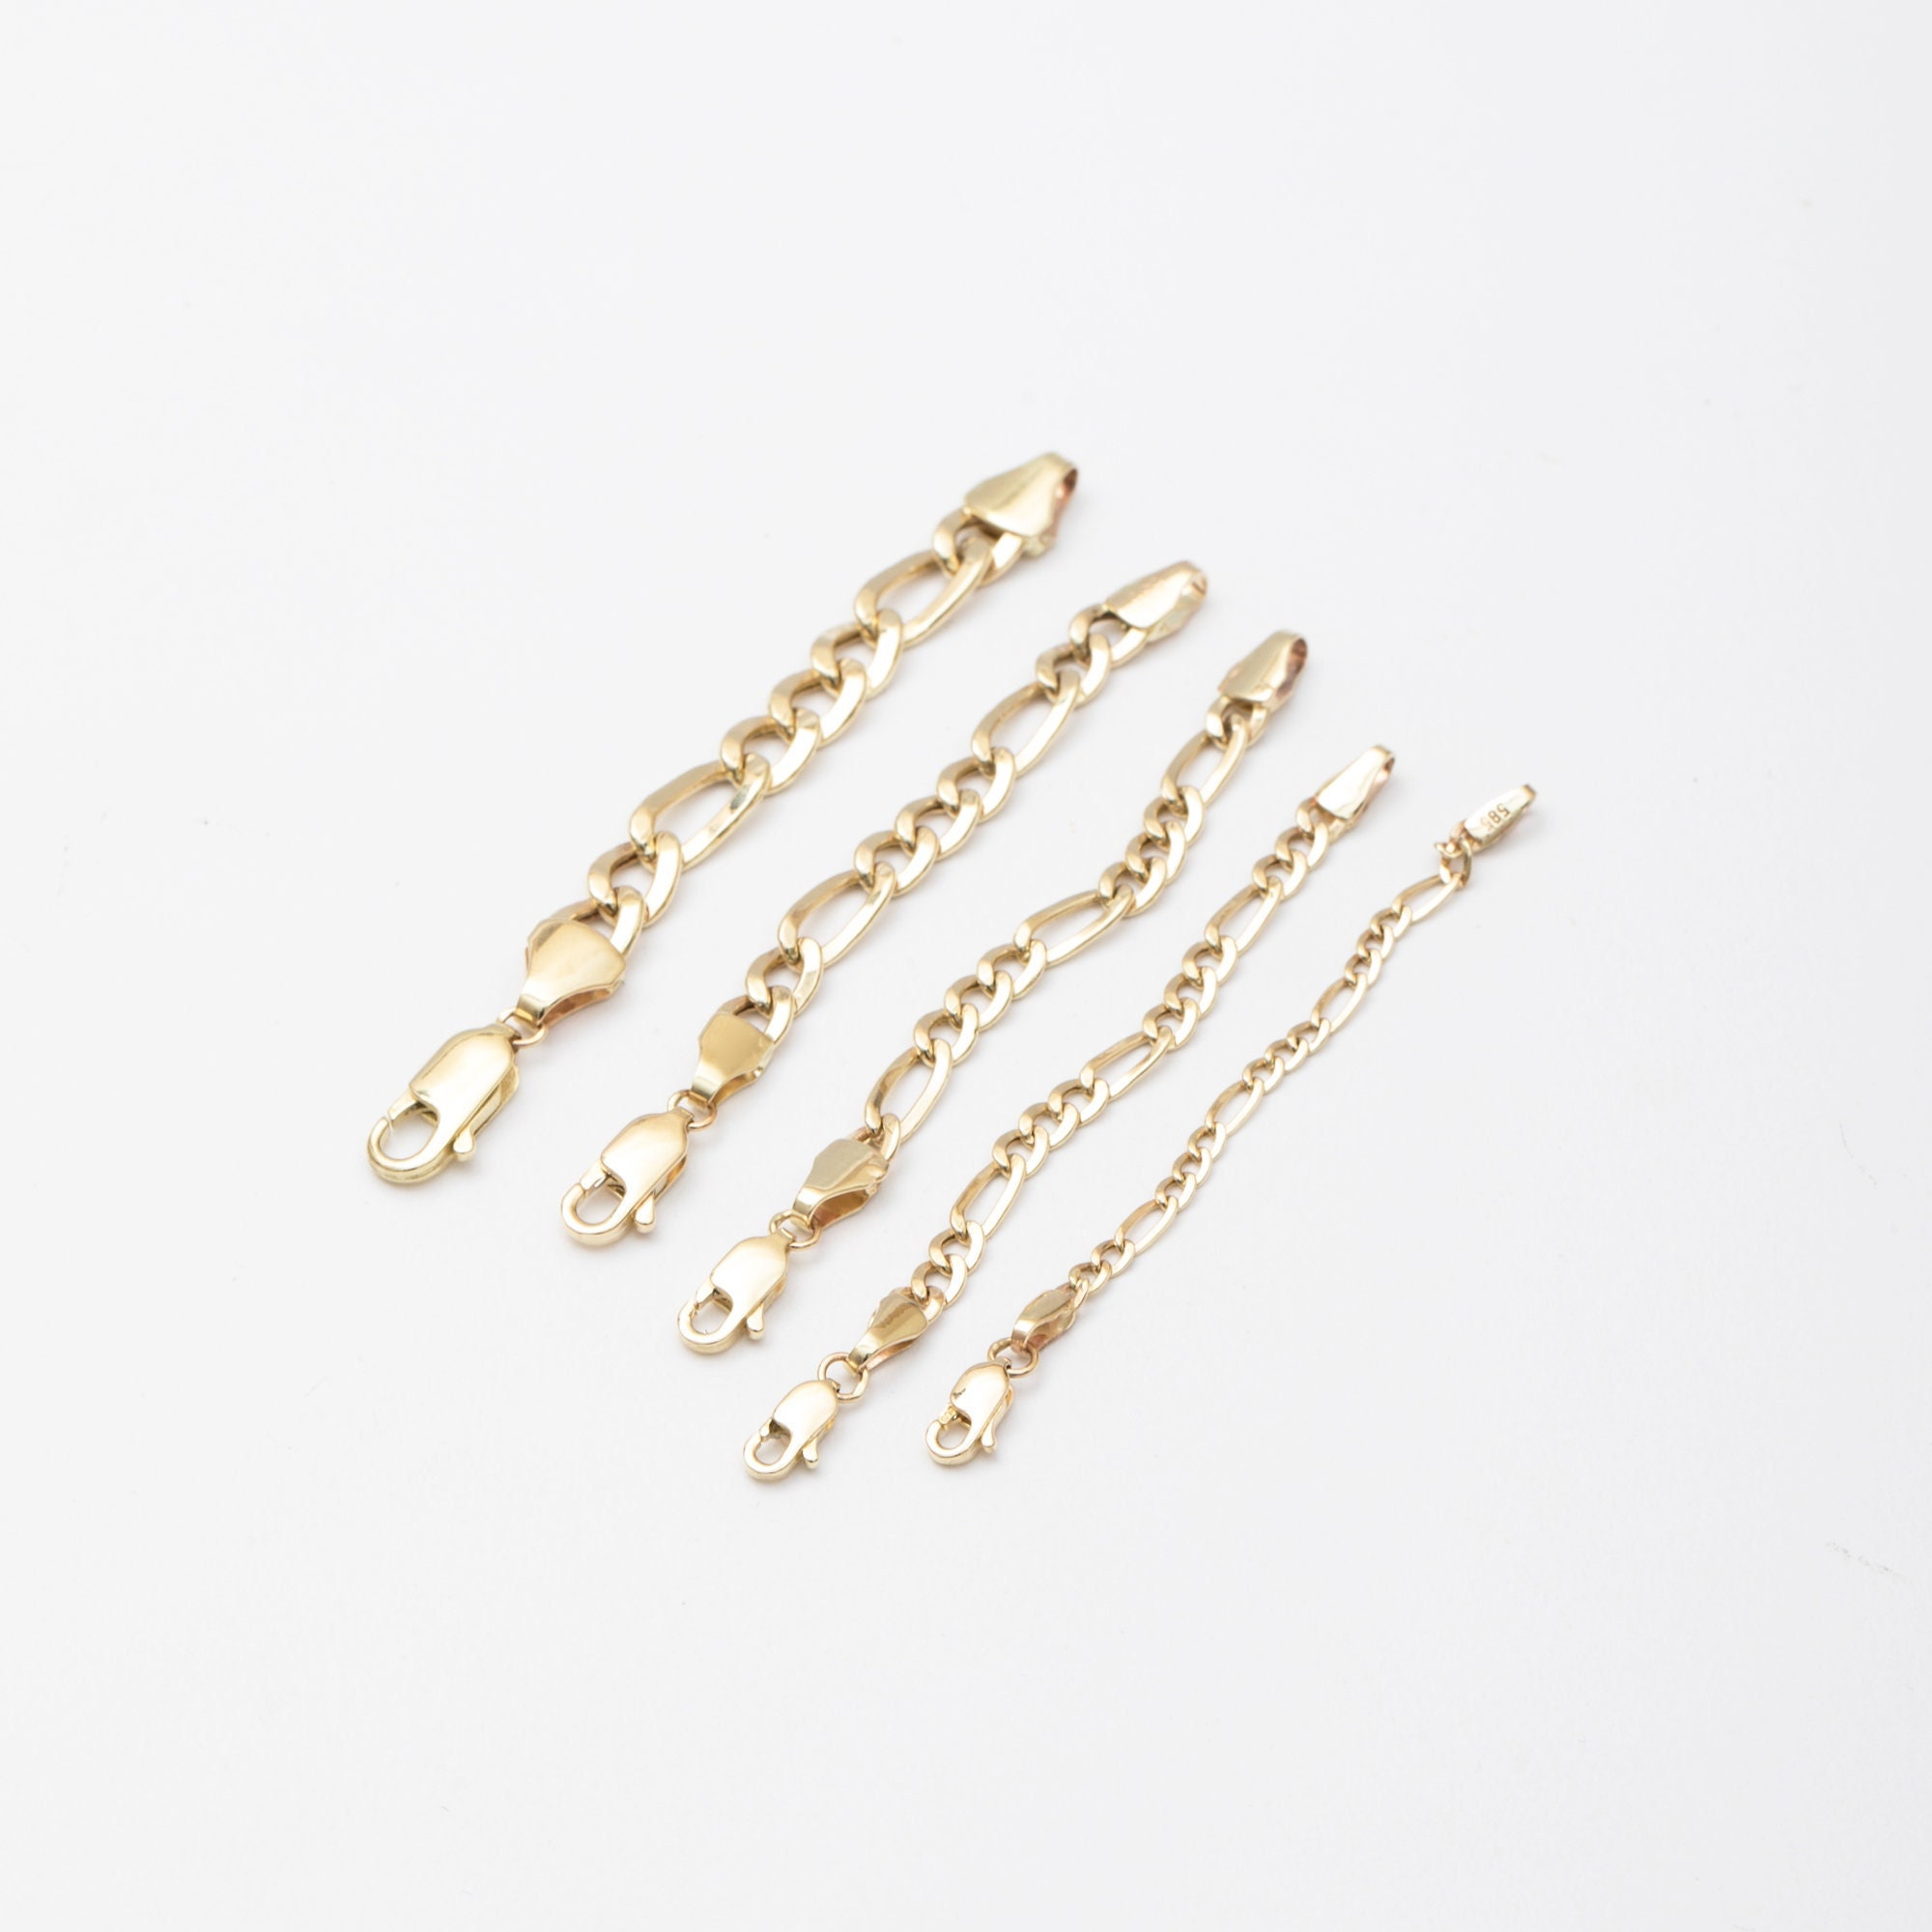 Chain Extender, Extension for Bracelet or Necklace. Sterling Silver 925.  Various Lengths Available 